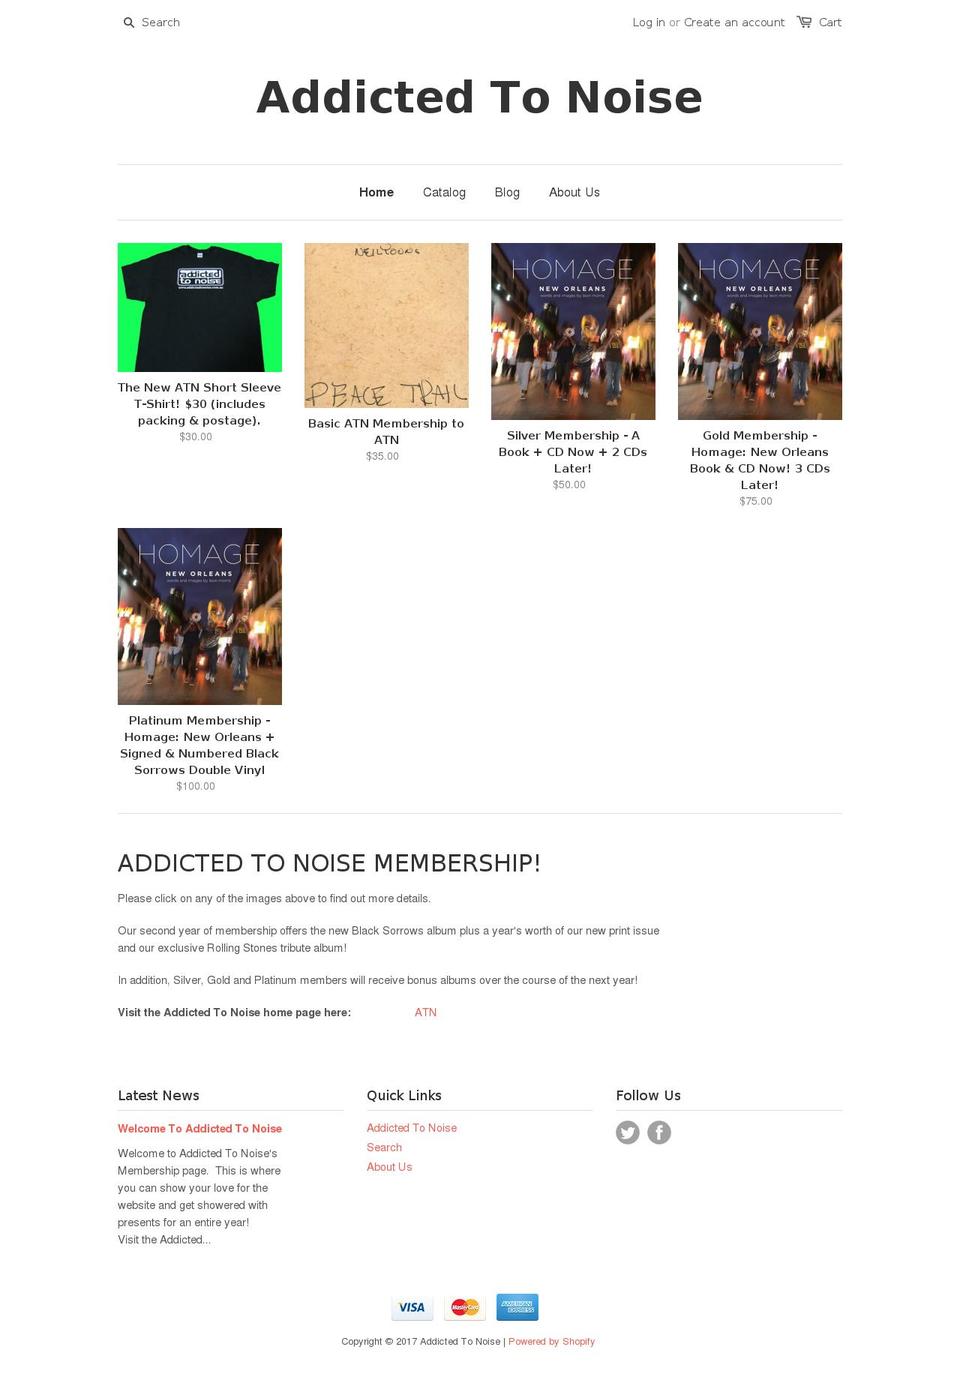 Launch Shopify theme site example addicted-to-noise.myshopify.com